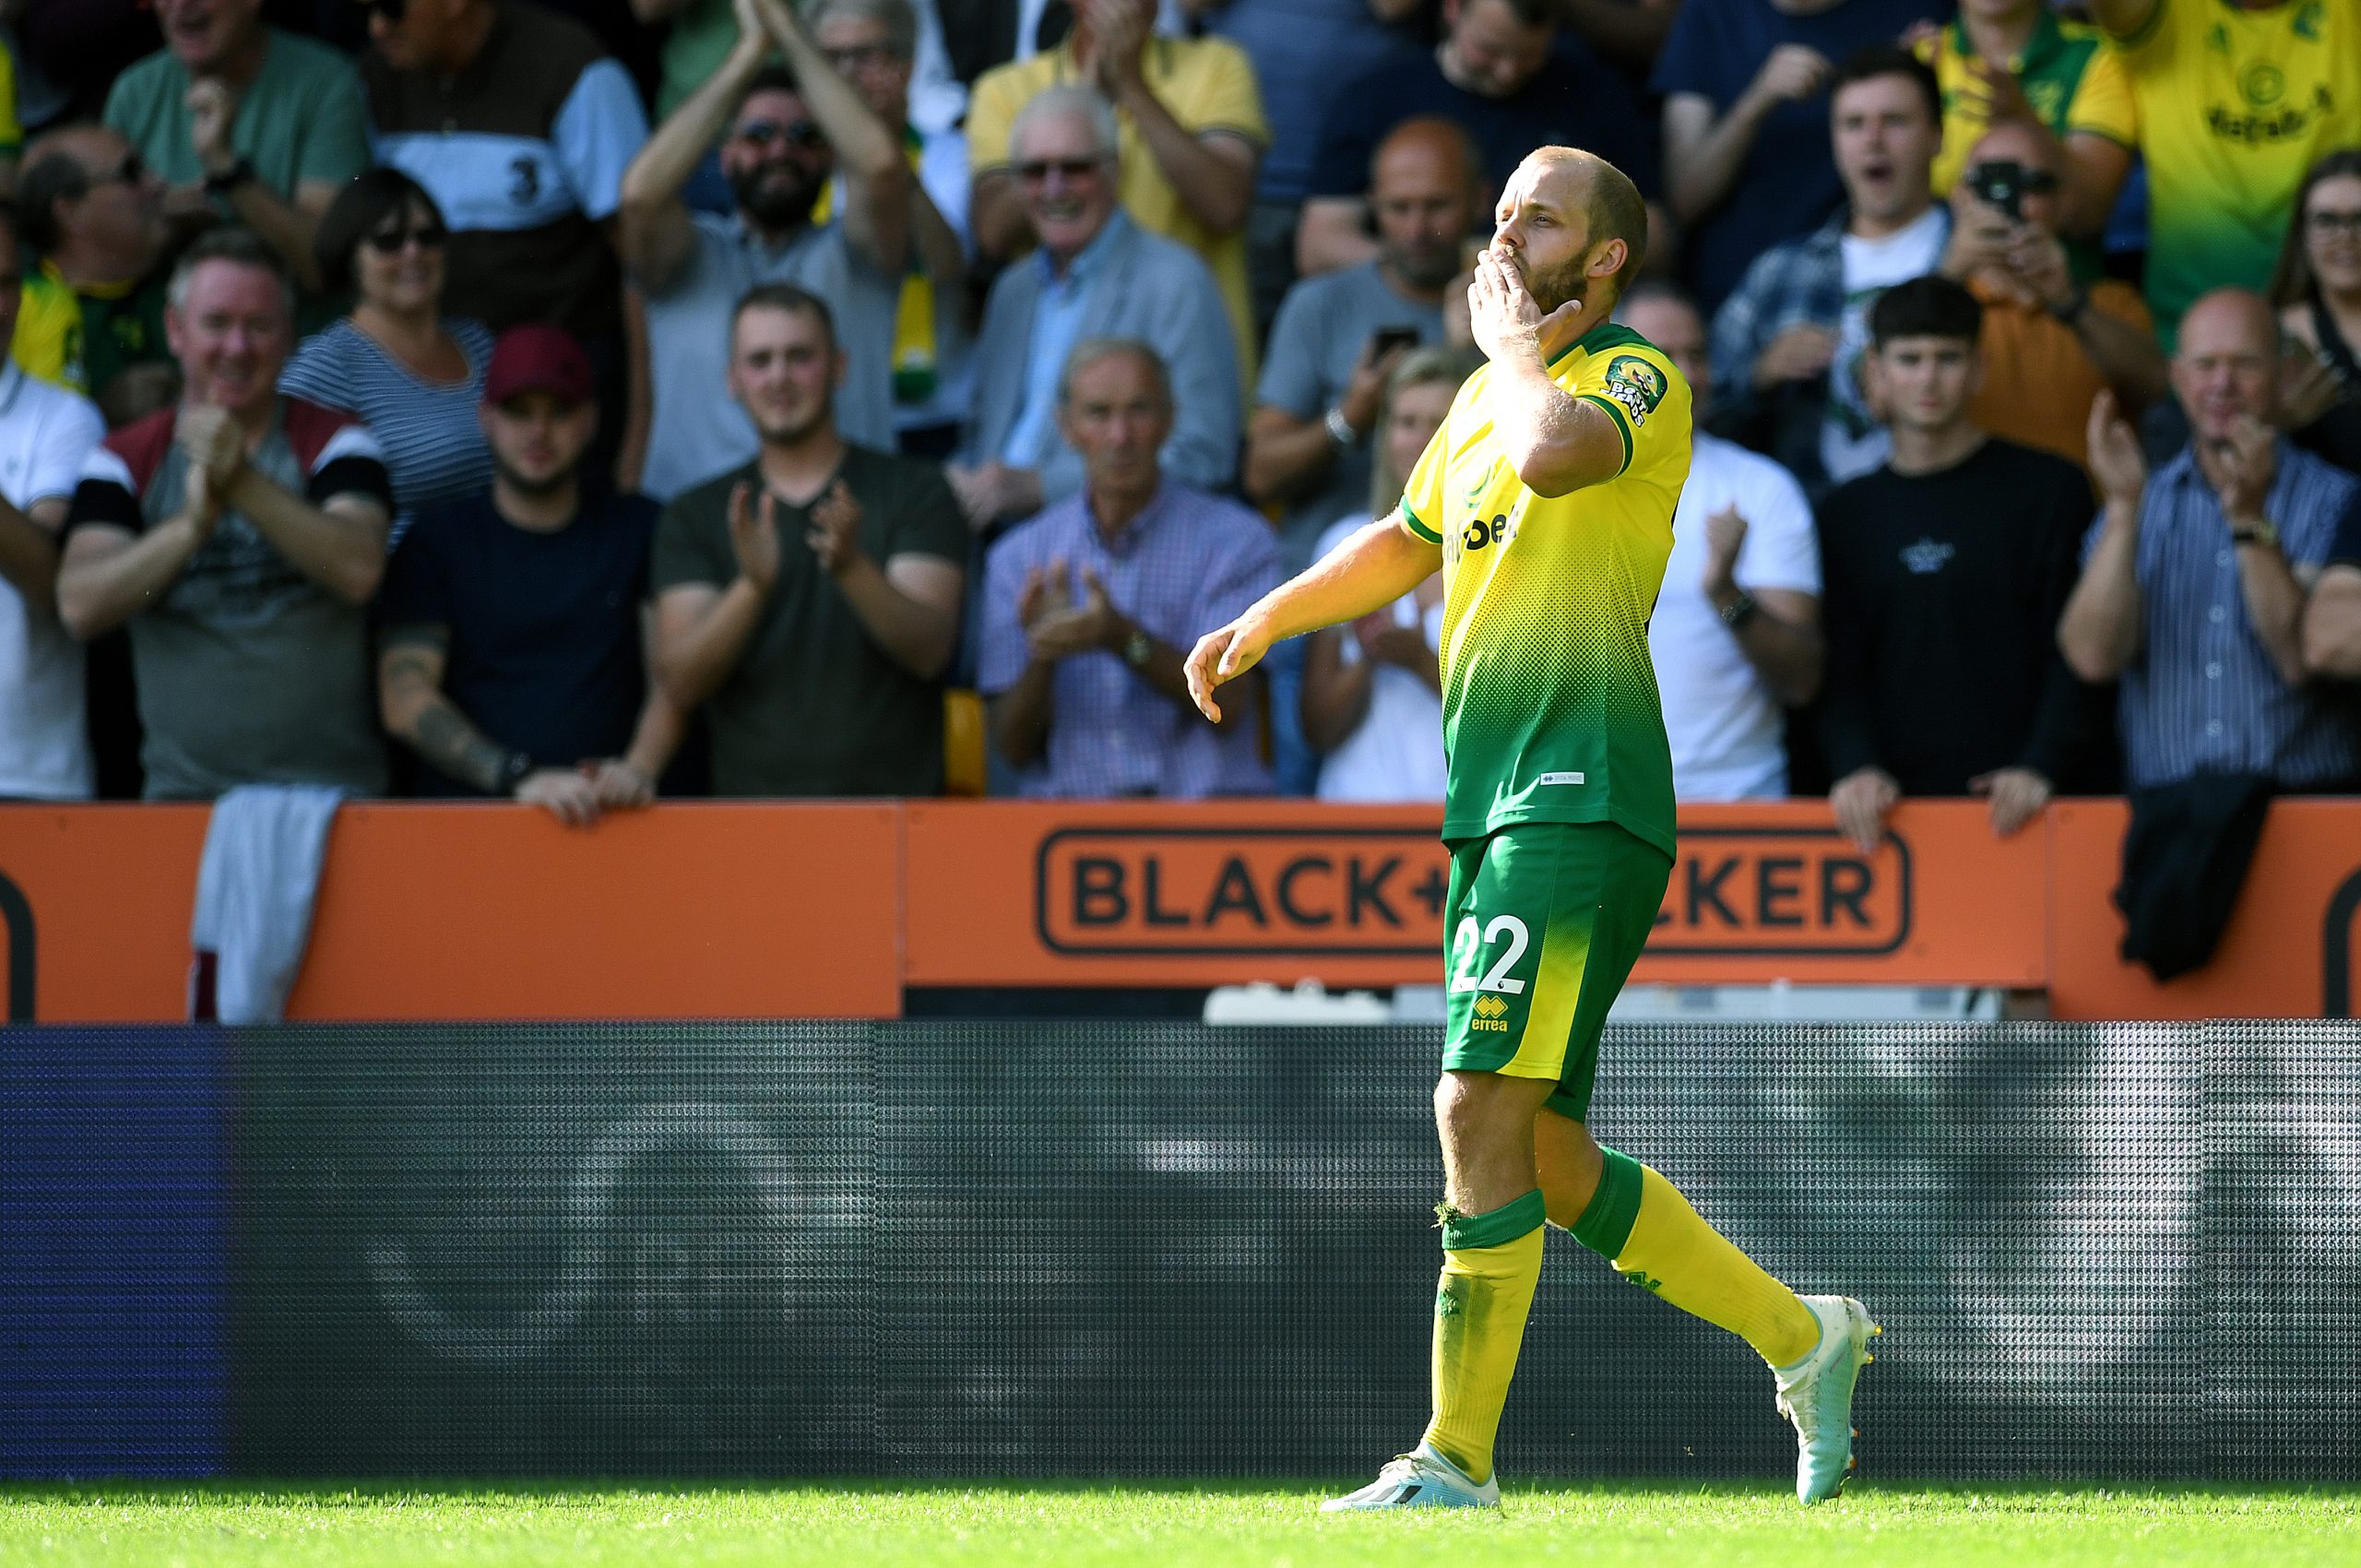 How Have Norwich City, Sheffield United and Aston Villa Shaped Up Through Week Three?